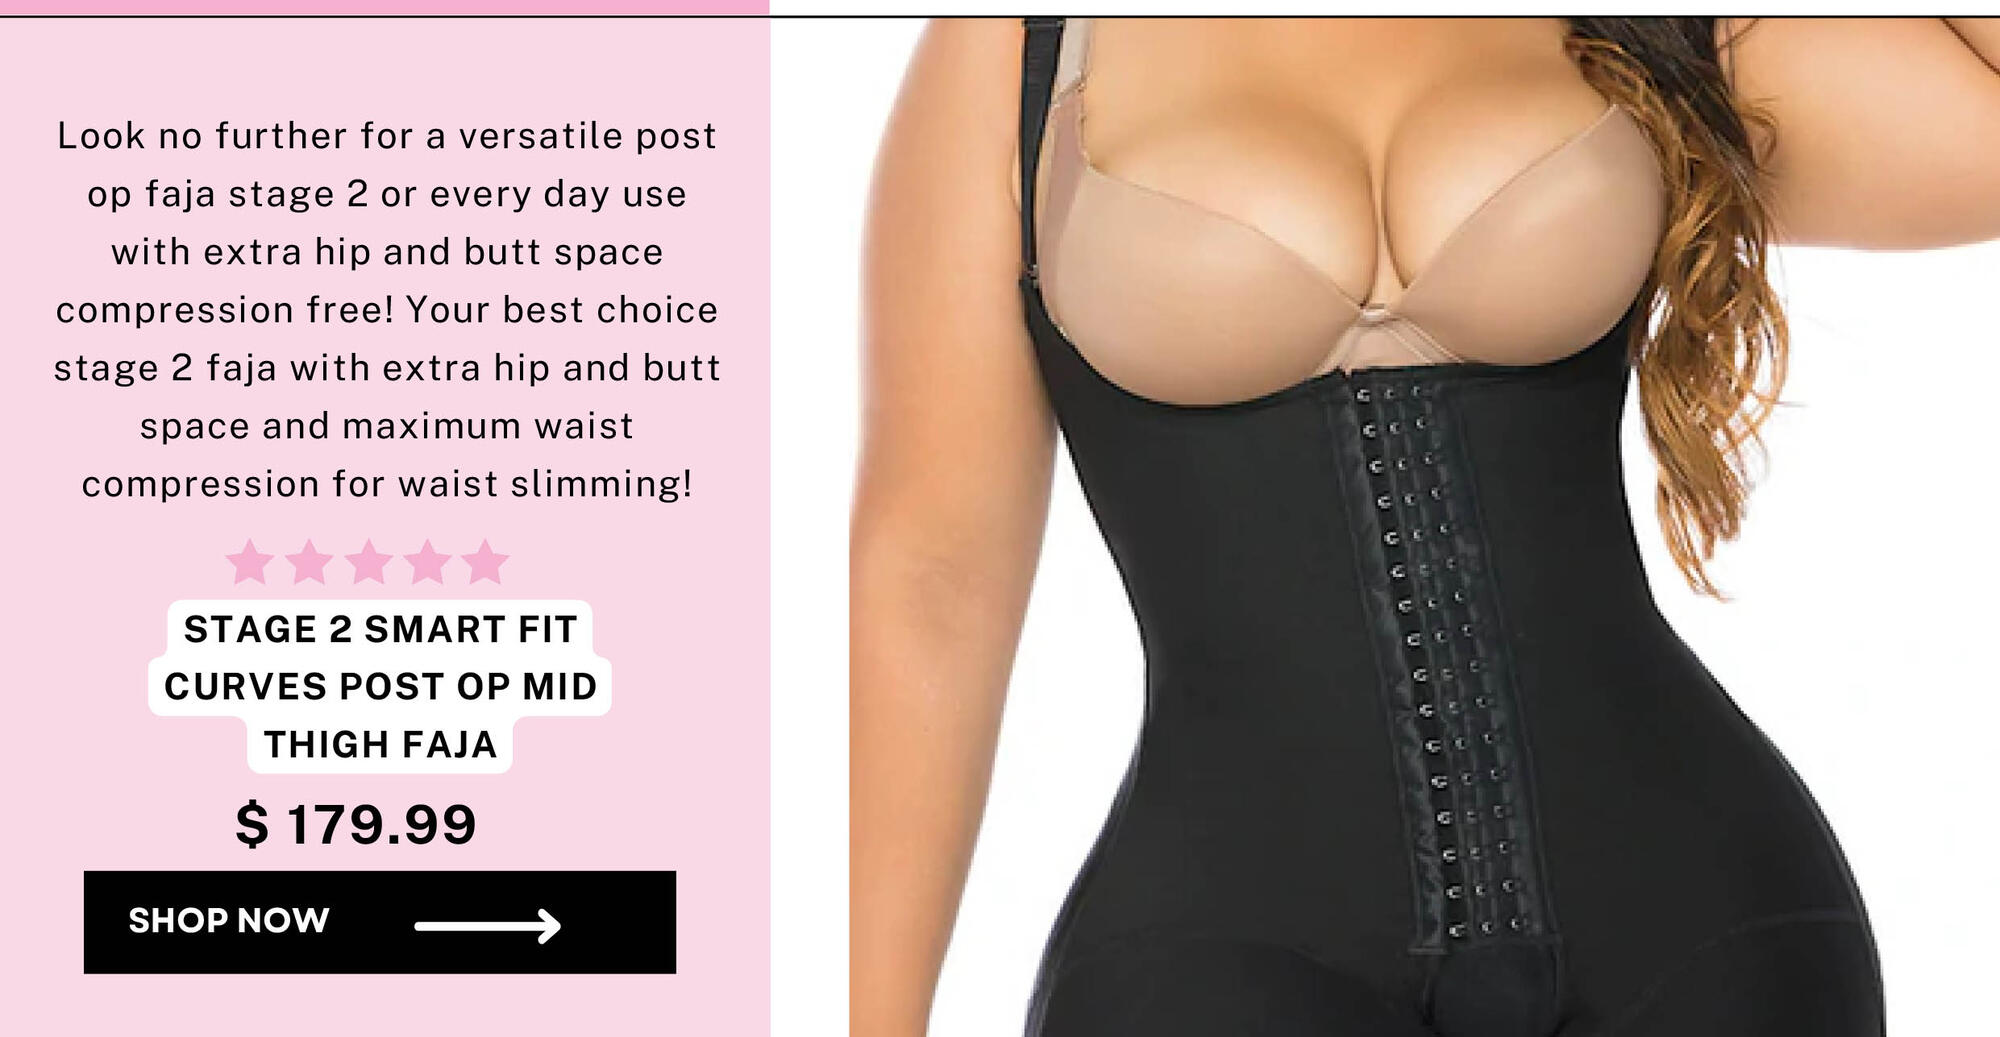  Look no further for a versatile post op faja stage 2 or every day use with extra hip and butt space compression free! Your best choice stage 2 faja with extra hip and butt space and maximum waist compression for waist slimming! STAGE 2 SMART FIT CURVES POST OP MID THIGH FAJA $179.99 SHOPNOW m 